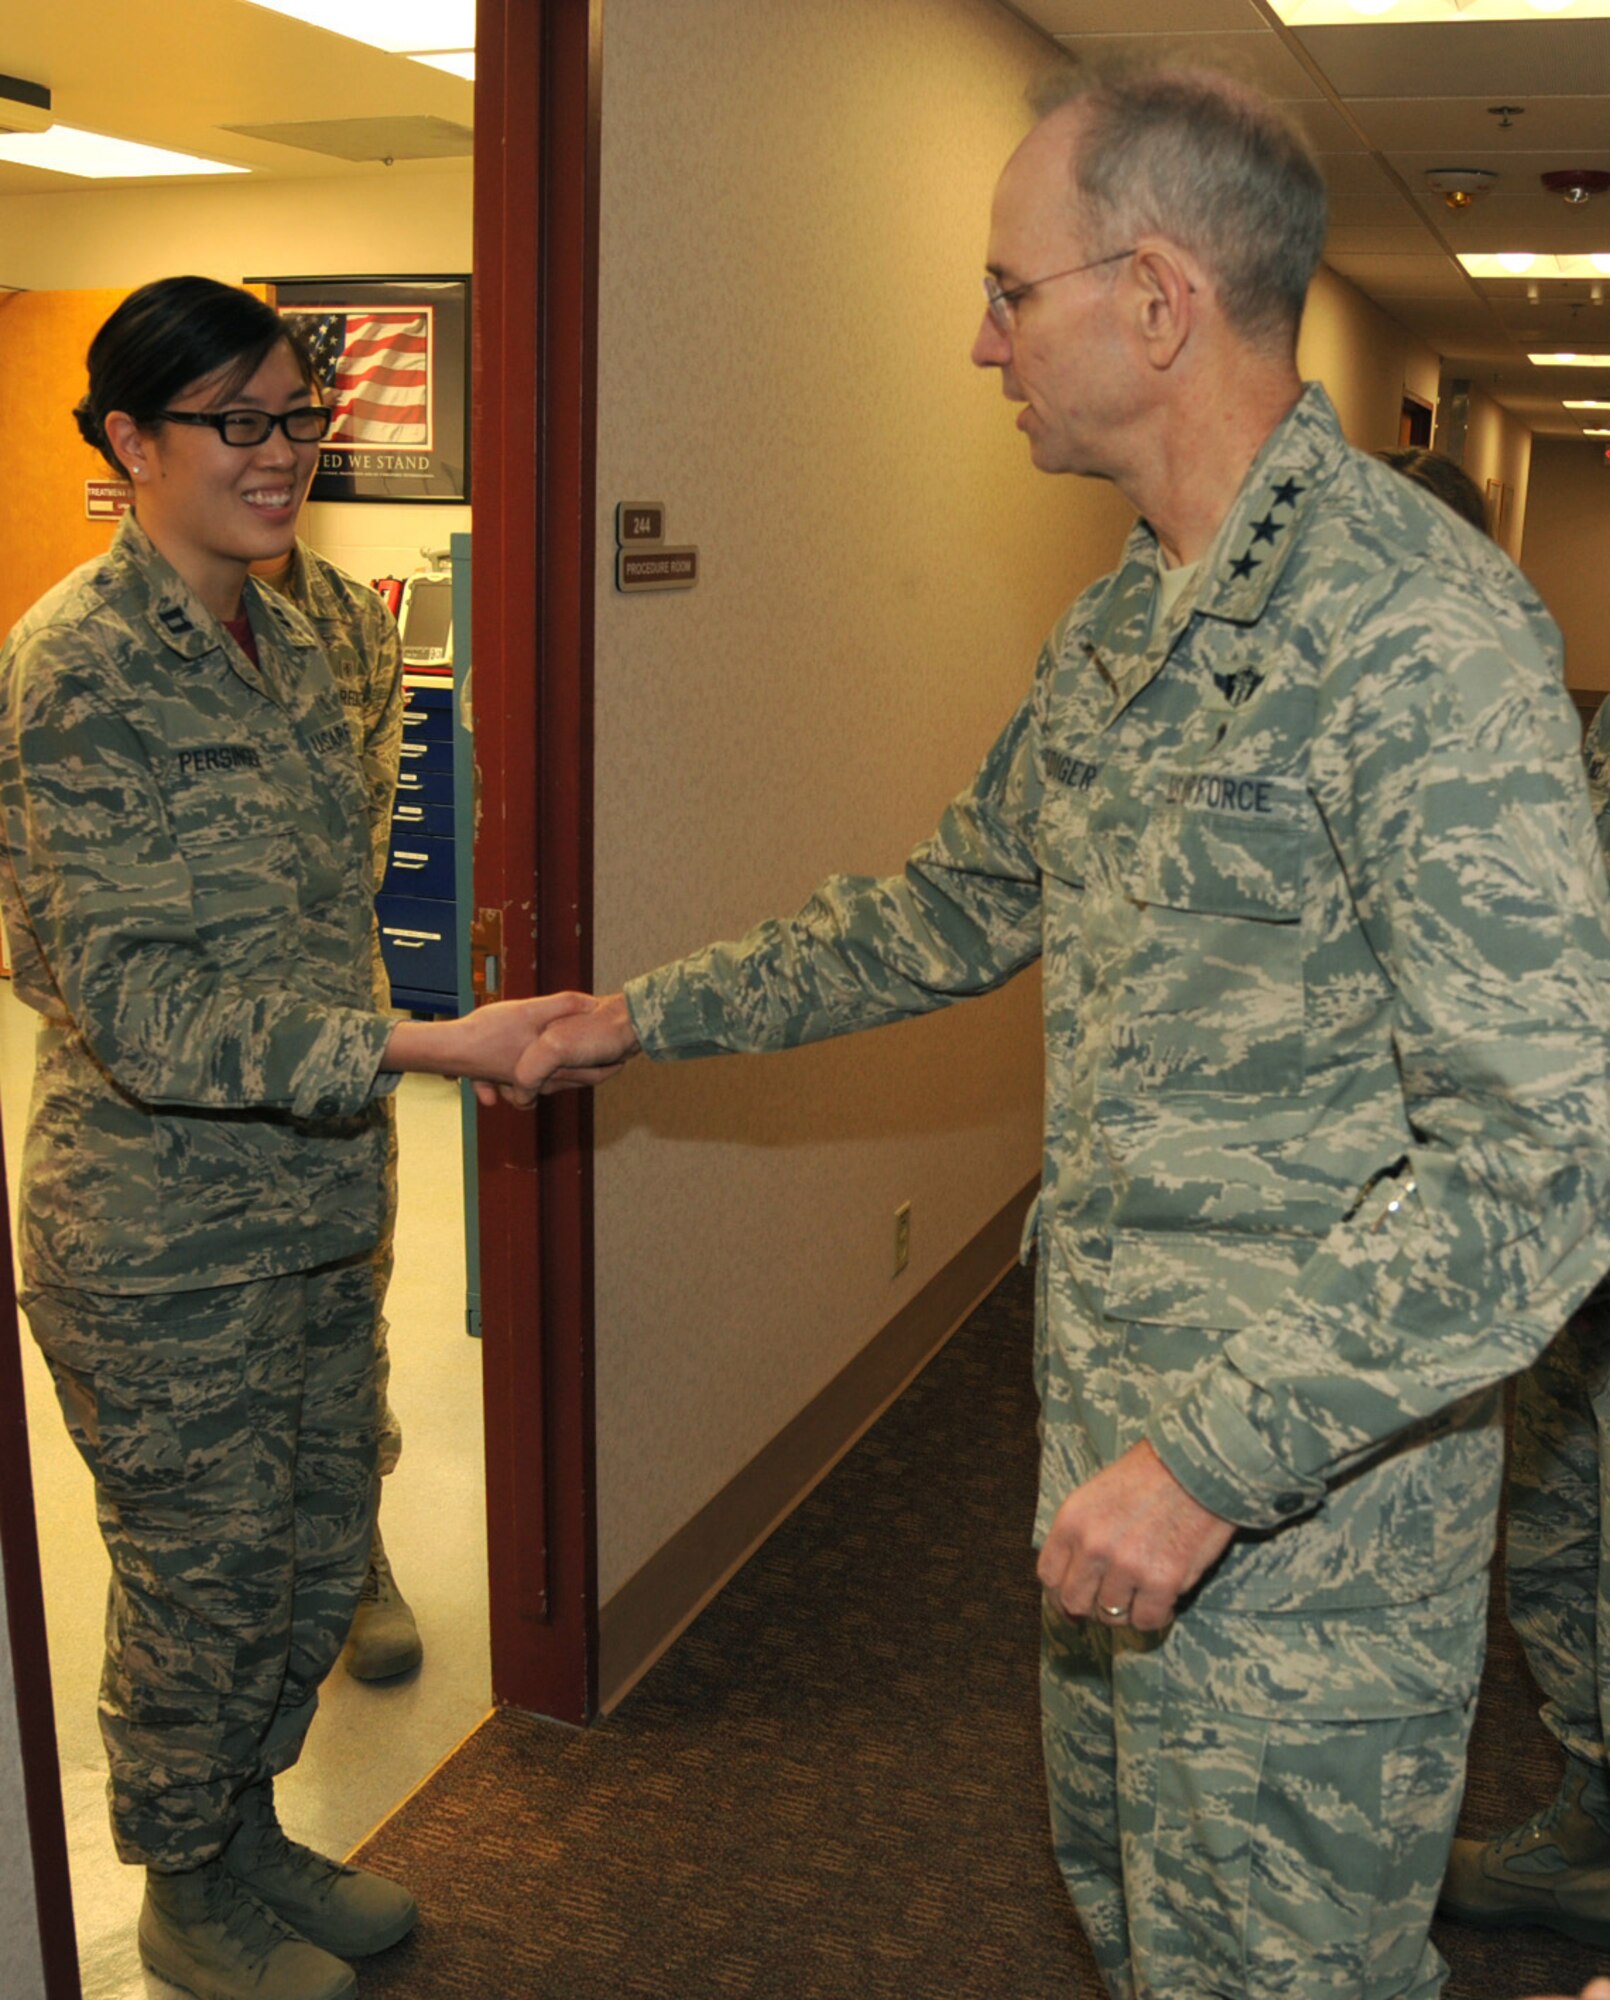 Air Force Surgeon General Lt. Gen. (Dr.) Mark Ediger, right, presents Capt. Christine Persinger, 319th Medical Operations Squadron family health physician, with a coin for her contributions to the 319th Medical Group March 4, 2016, on Grand Forks Air Force Base, North Dakota. Gen. Ediger visited with many Airmen during his tour of the medical facilities. (U.S. Air Force photo by Airman 1st Class Ryan Sparks/Released)